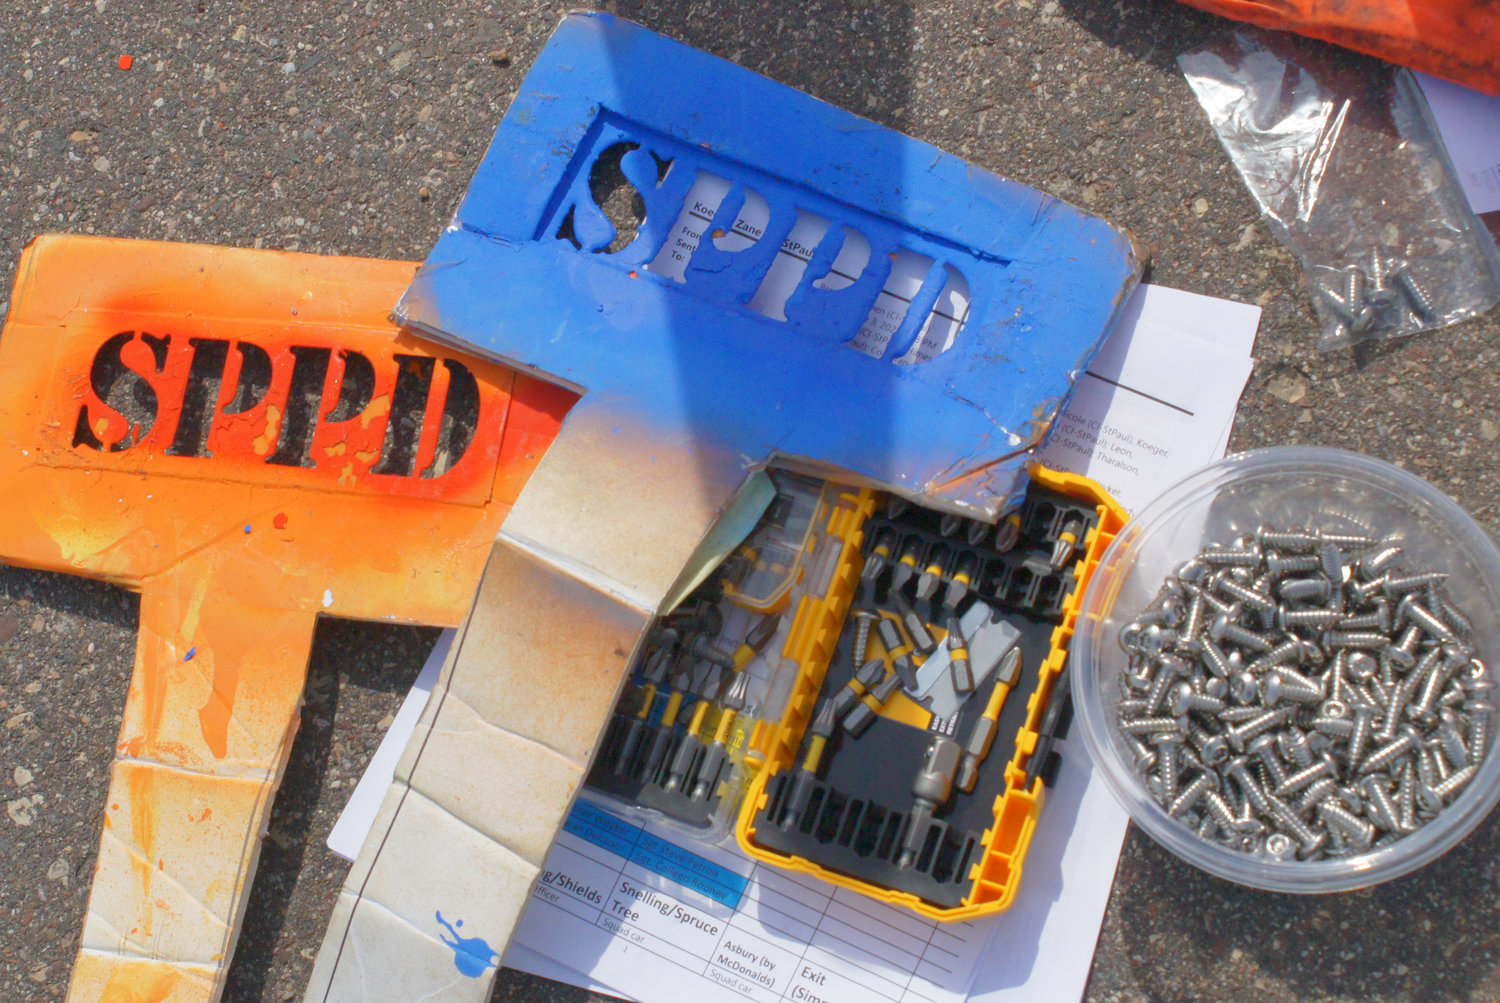 Tools of the event: SPPD stencils were placed against converters before painting when vehicles had high ground clearance. A variety of screw bits were used for the drills to replace existing license plate fasteners with anti-theft screws.